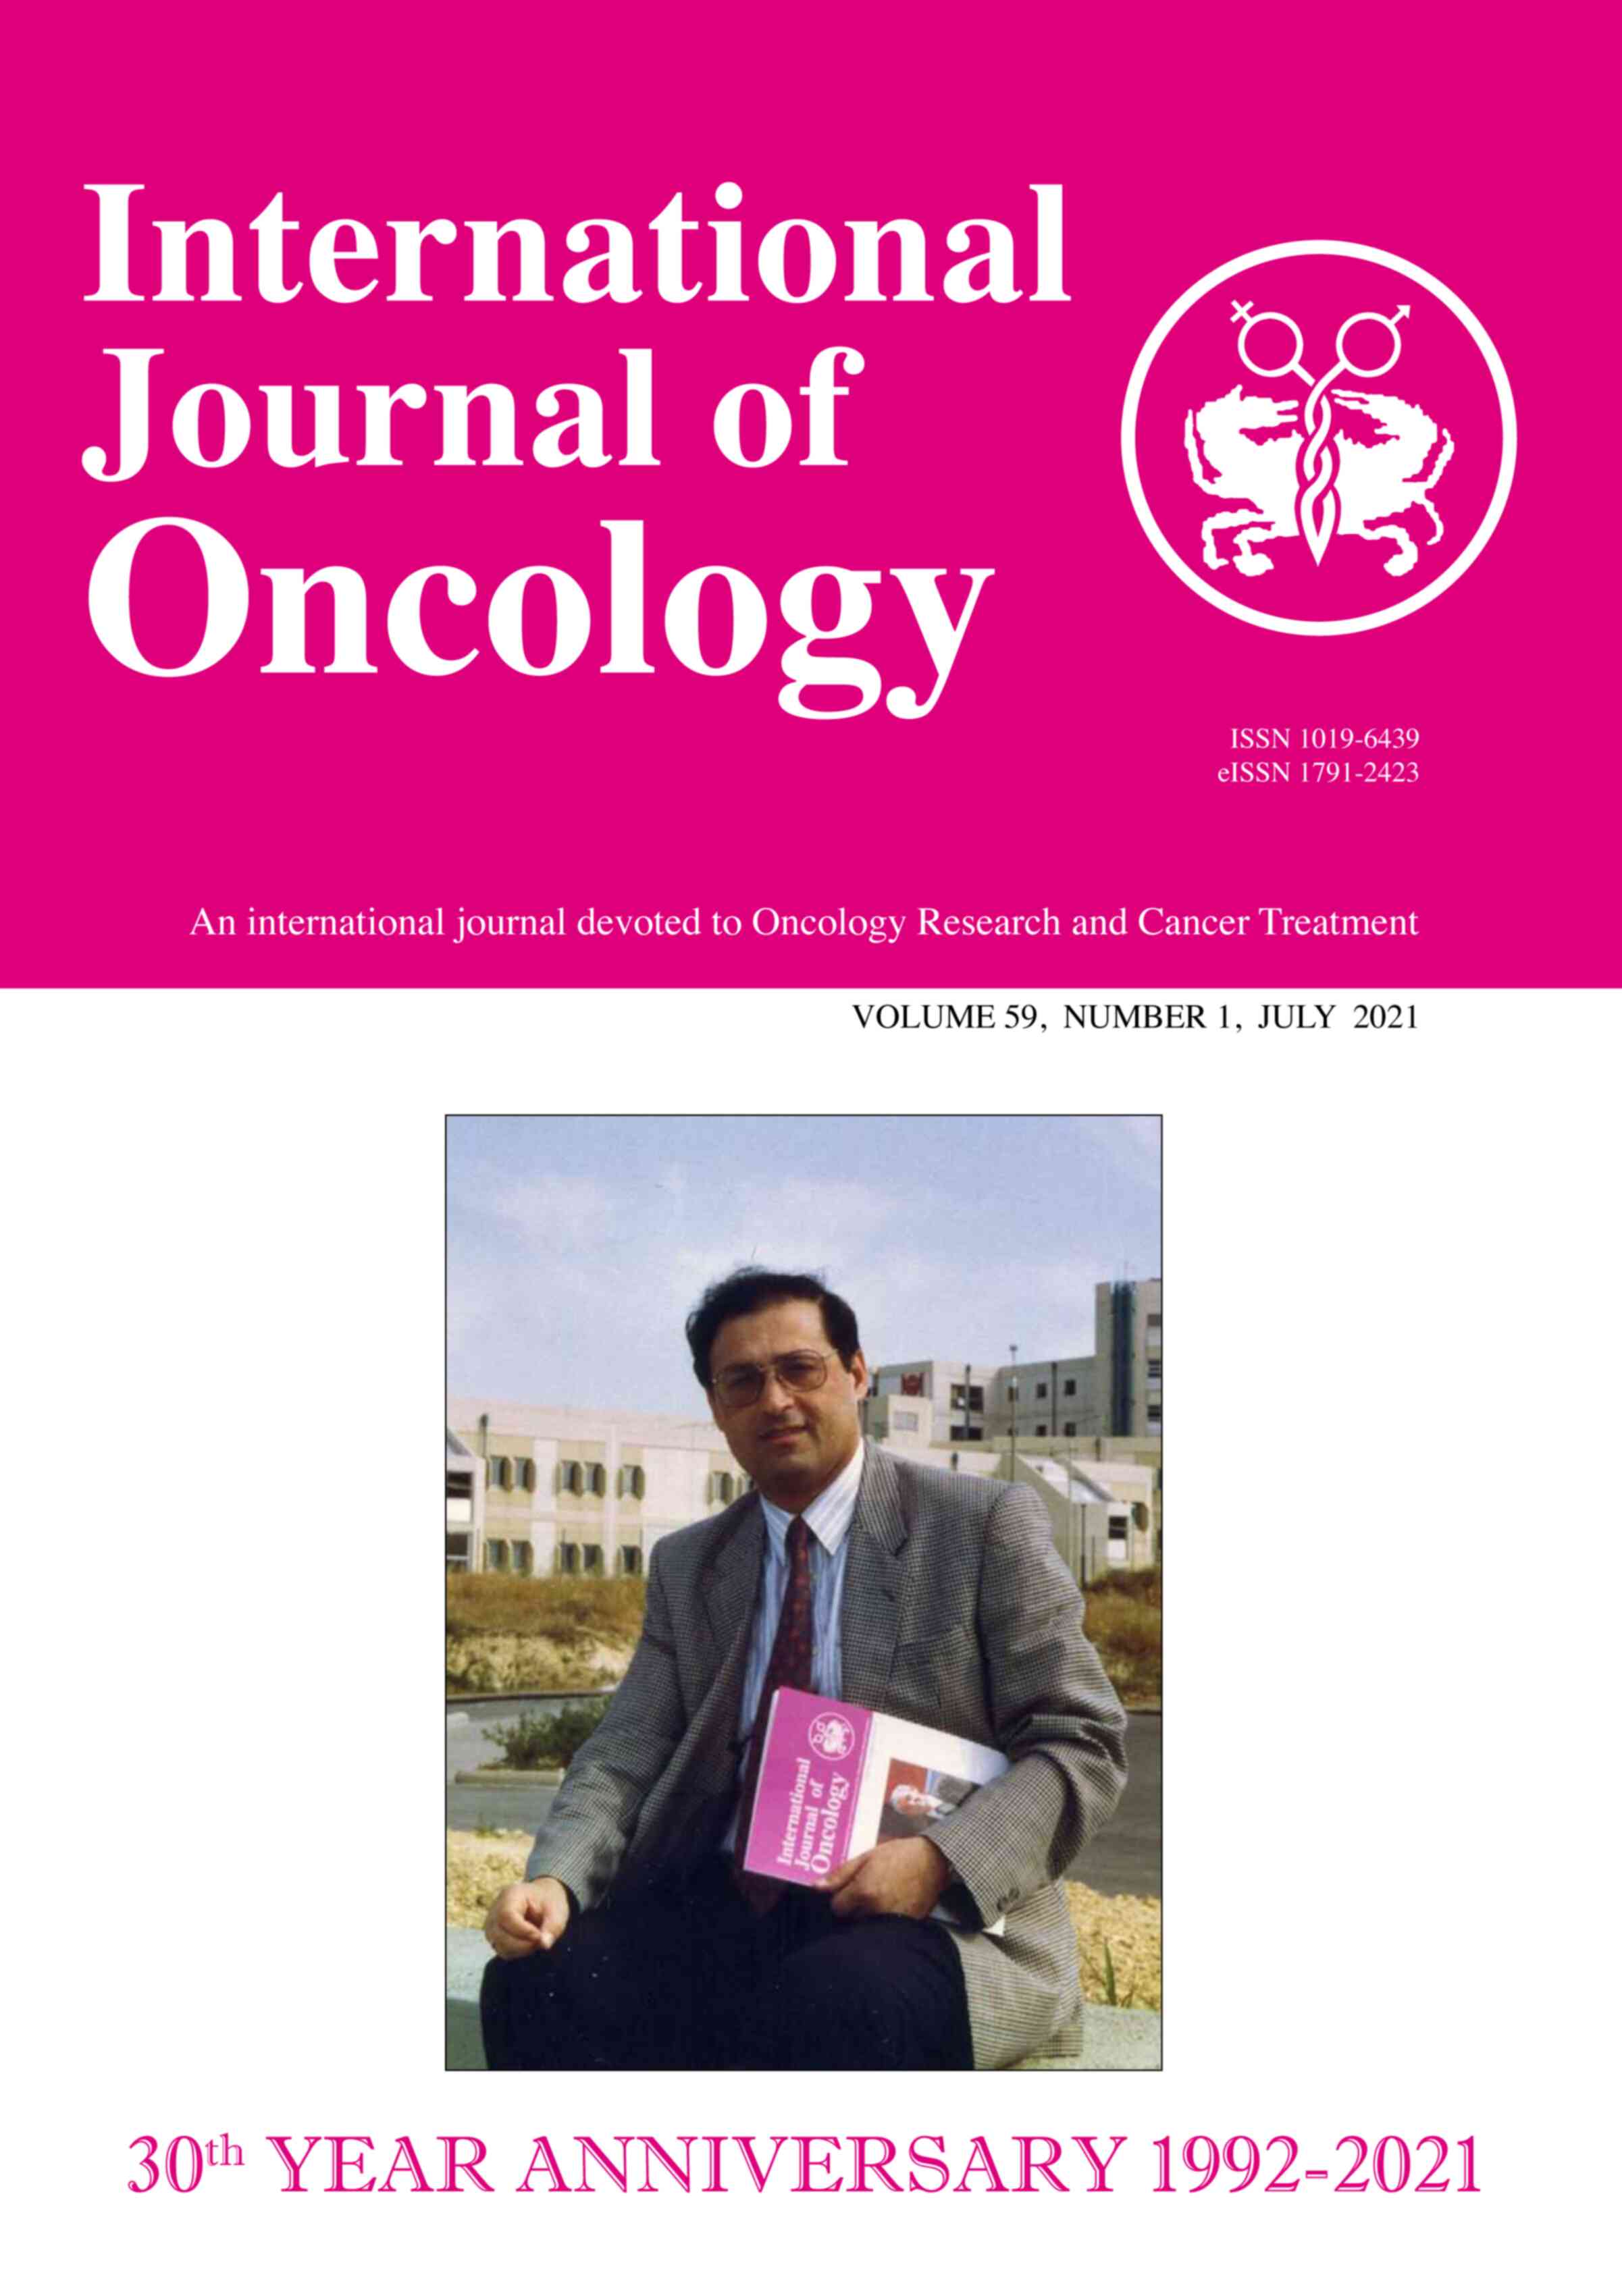 oncology editorial committee medical research archives